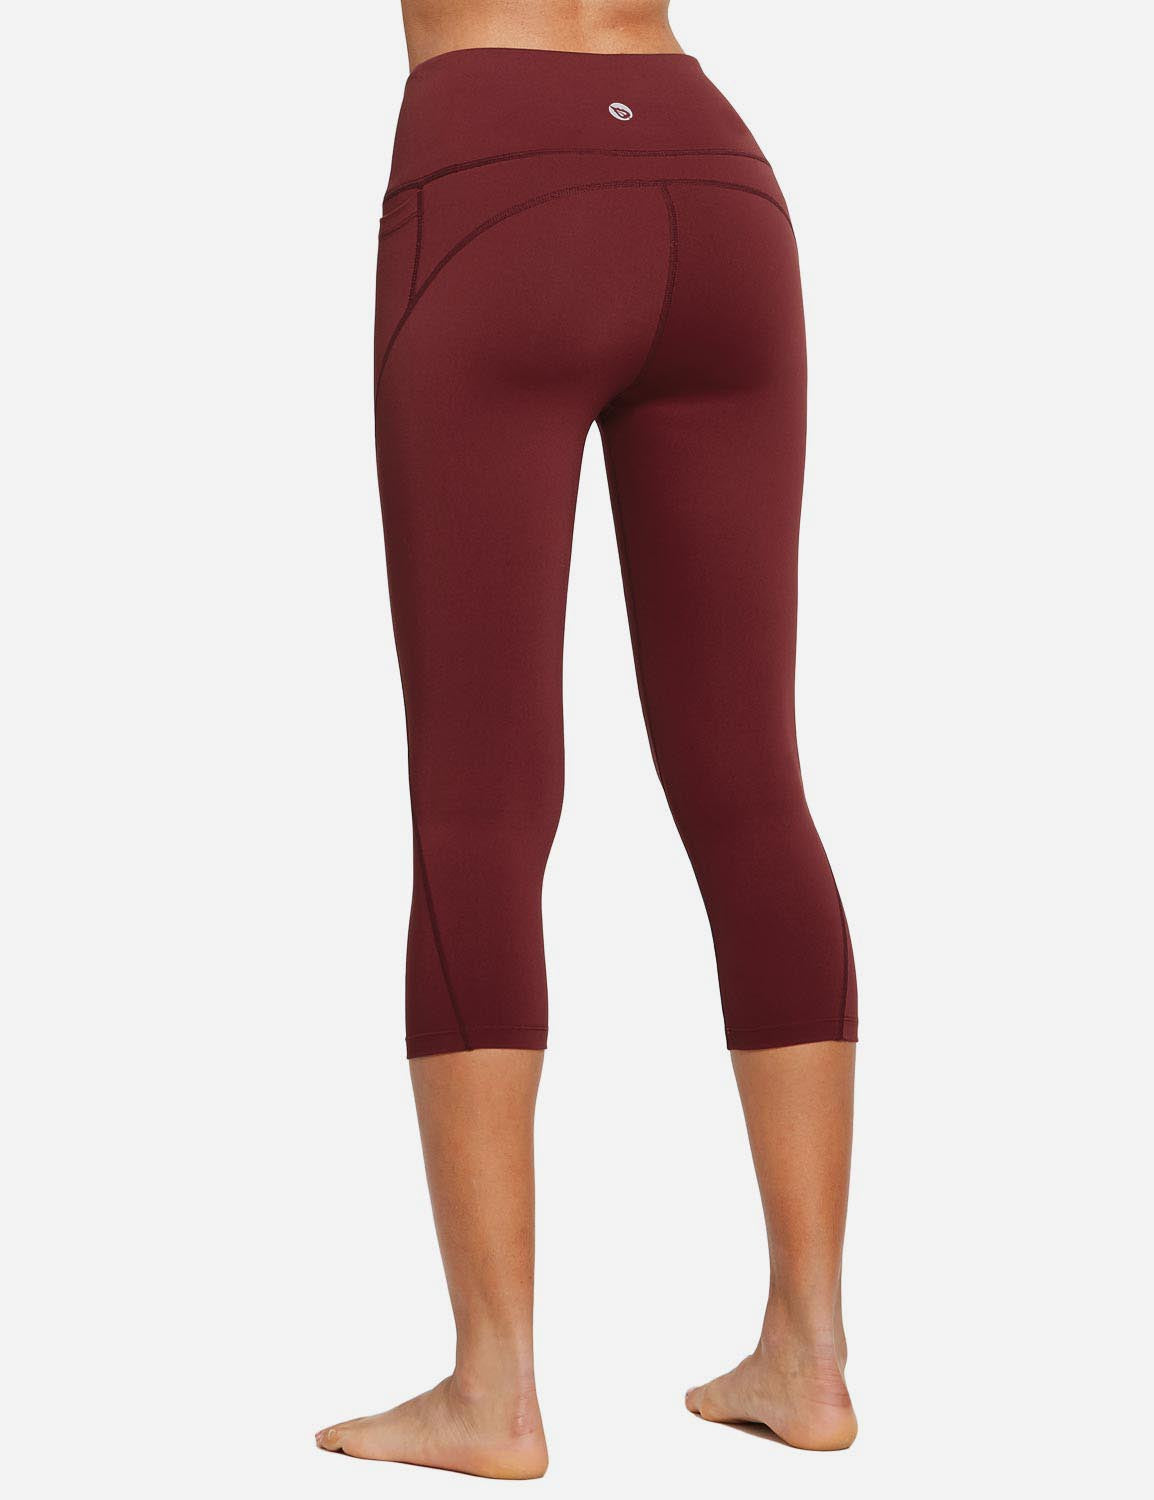 Baleaf Women's High Rise Bottom Contour Pocketed Capris abh168 Wine Red Back